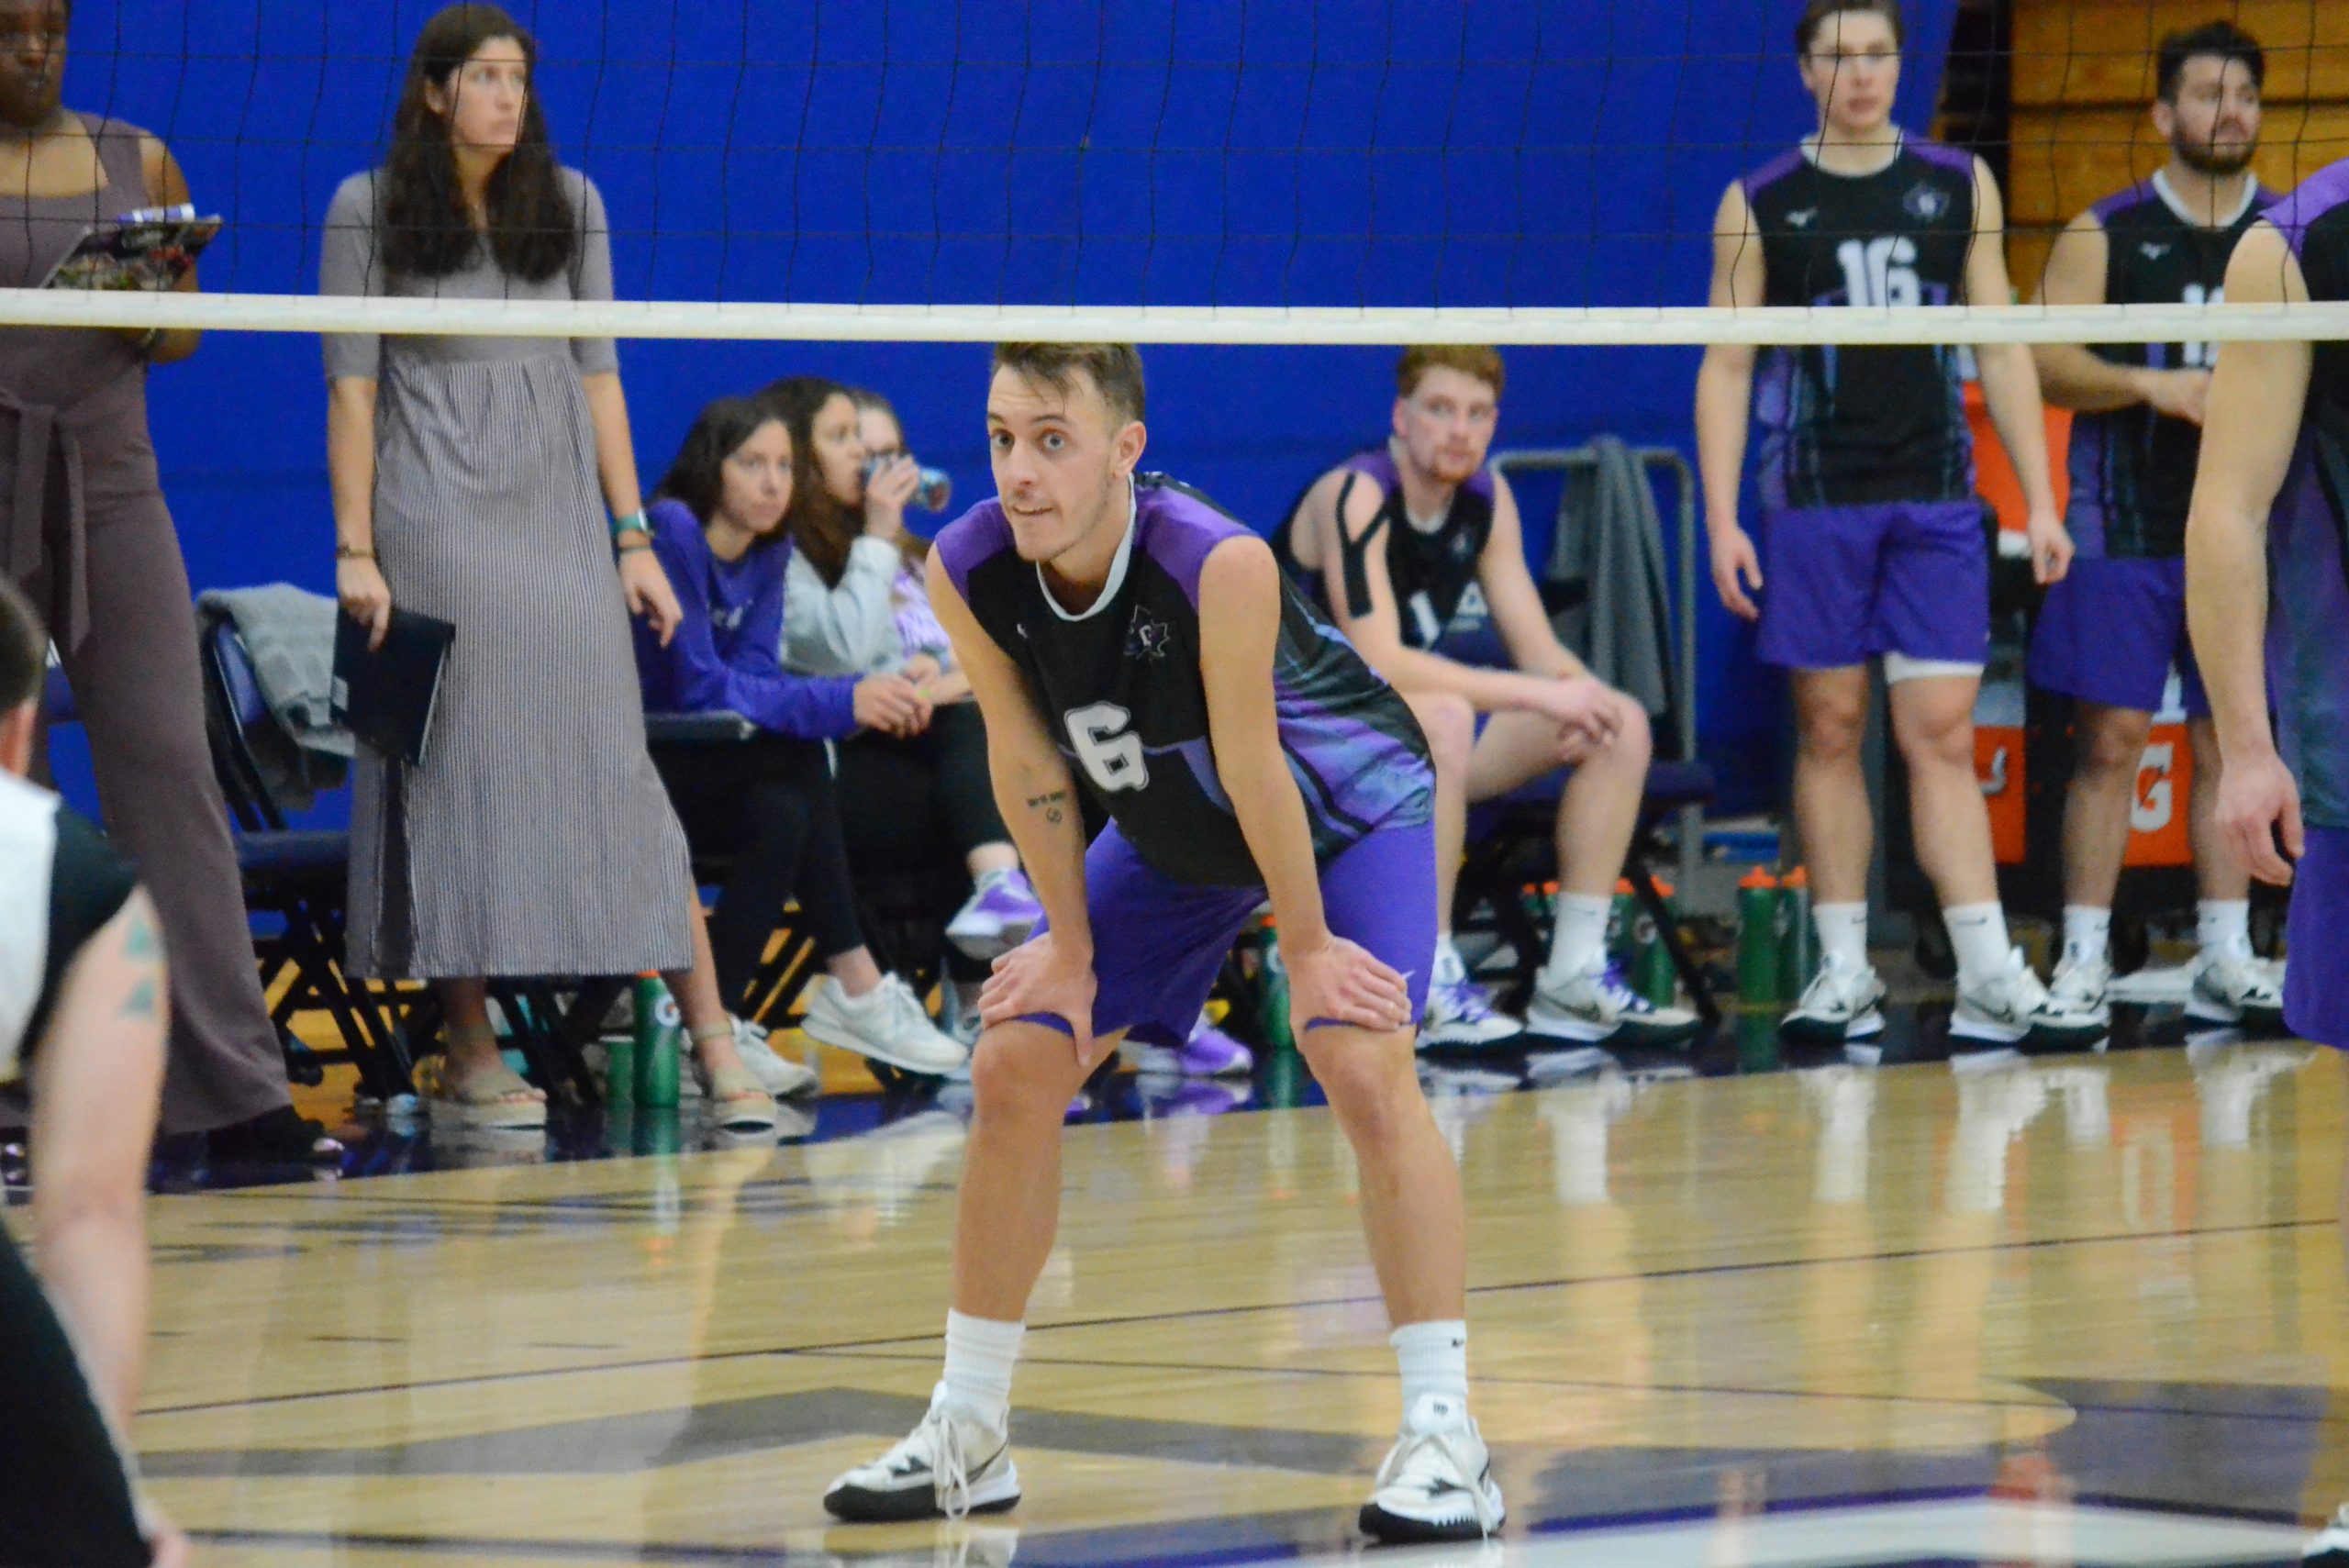 Michael Wahl gets ready for a point.